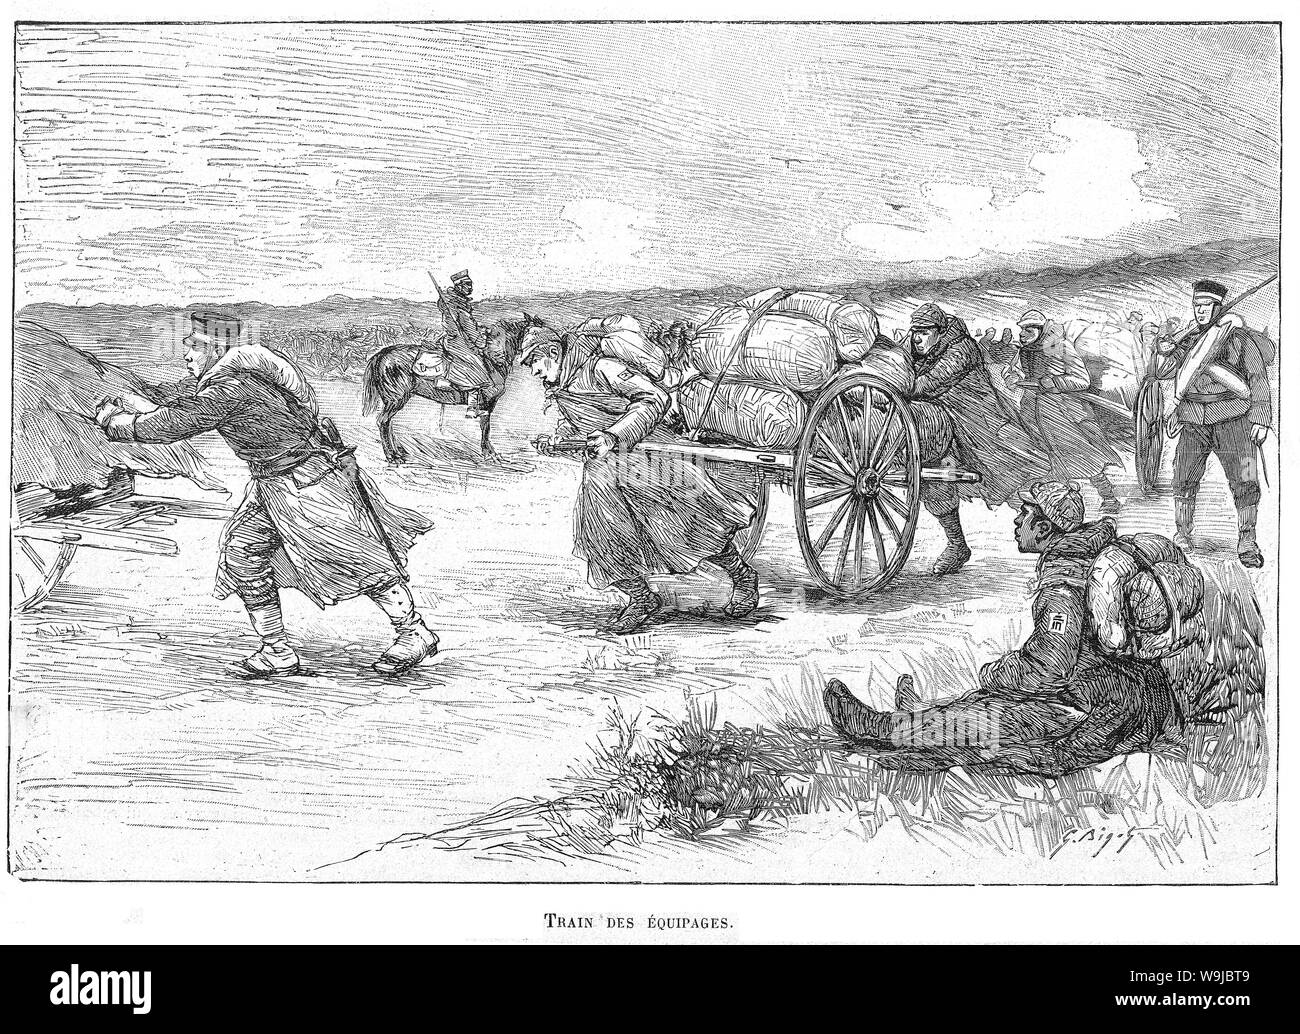 [ 1890s Japan - First Sino-Japanese War (1894–1895) ] —   Transport of supplies during the First Sino-Japanese War (1894–1895).  Published in the French illustrated weekly Le Monde illustré on January 12, 1895 (Meiji 28). Art by French artist Georges Ferdinand Bigot (1860-1927), famous for his satirical cartoons of life in Meiji period Japan.  Original text: 'Train des Equipages.'  19th century vintage newspaper illustration. Stock Photo